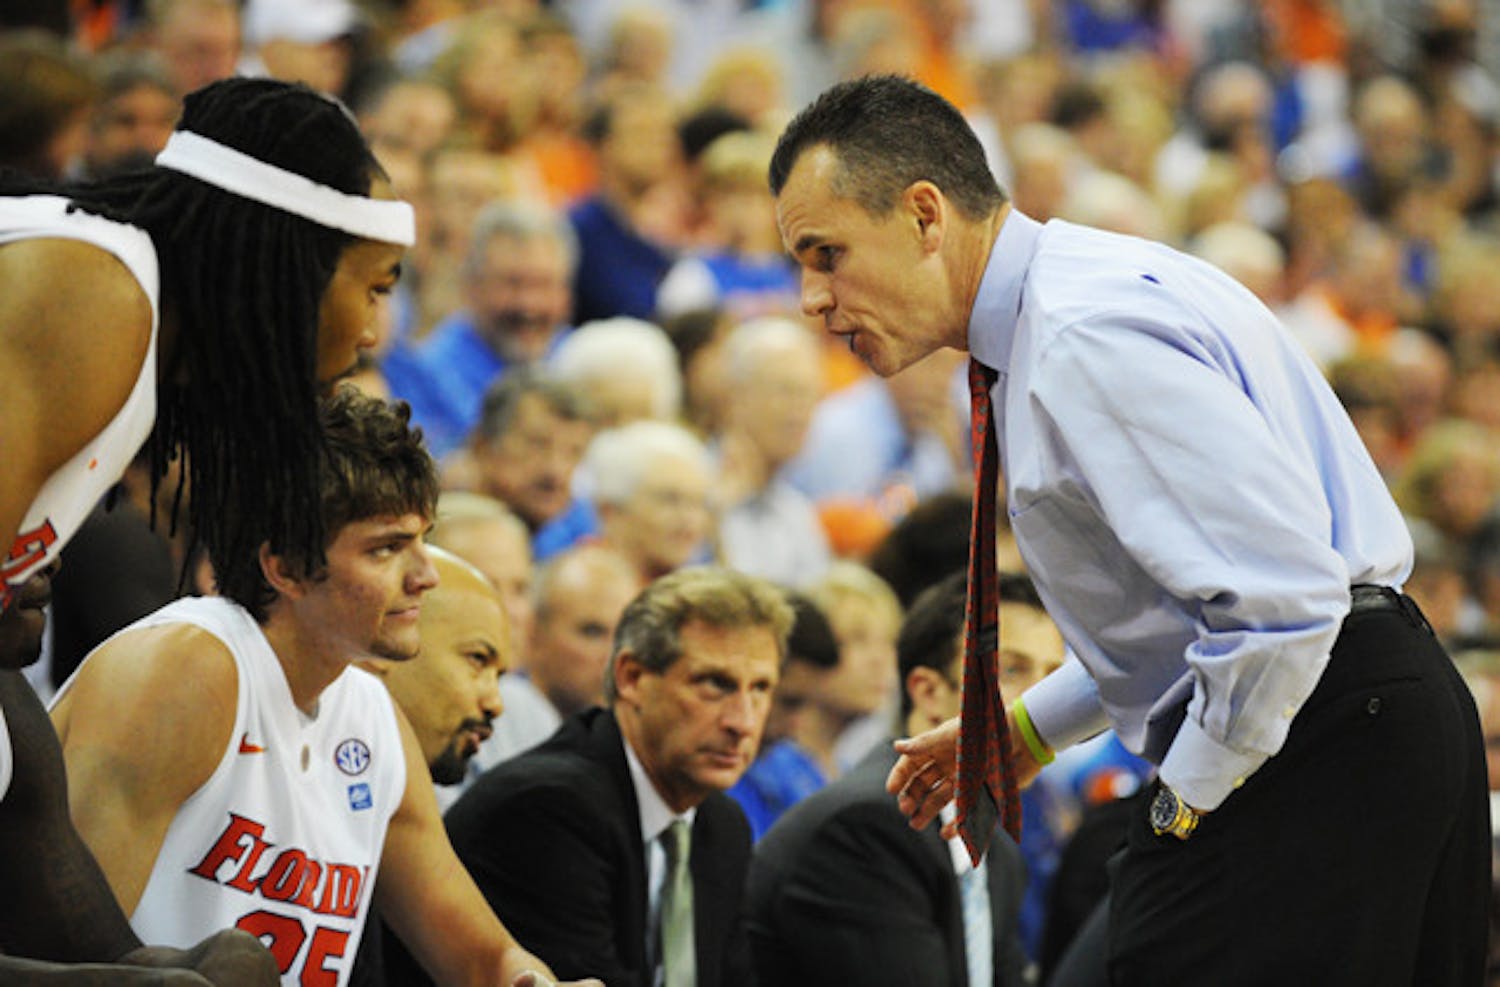 Despite the departure of seniors Chandler Parsons and Alex Tyus, coach Billy Donovan’s squad is ranked in the top 10 to start the 2011-12 season — its highest position since 2006.